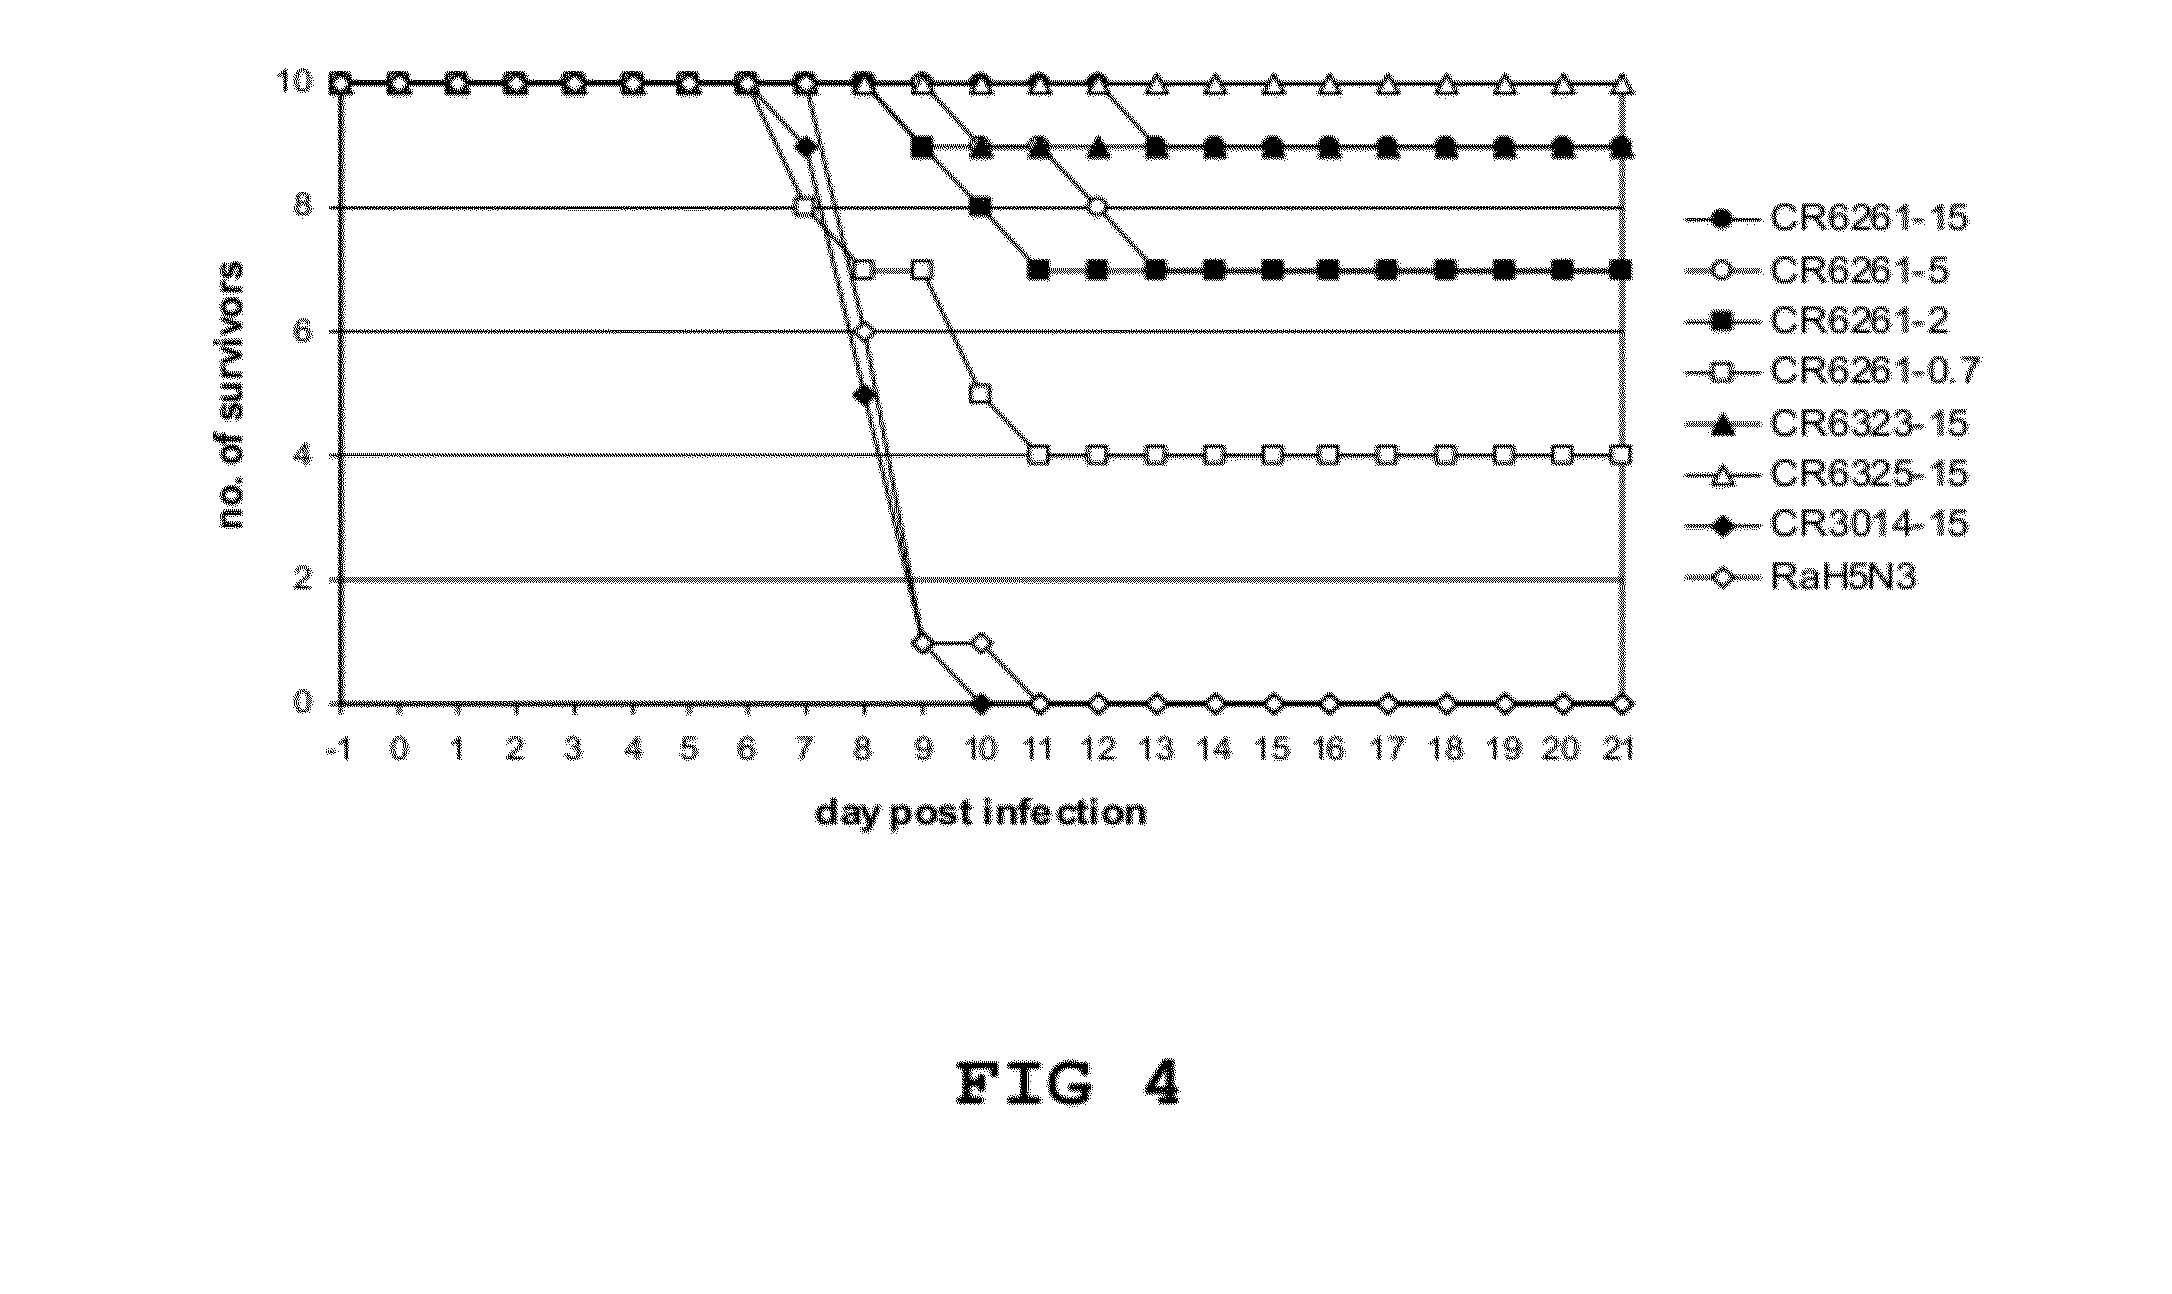 Human binding molecules capable of neutralizing influenza virus h5n1 and uses thereof